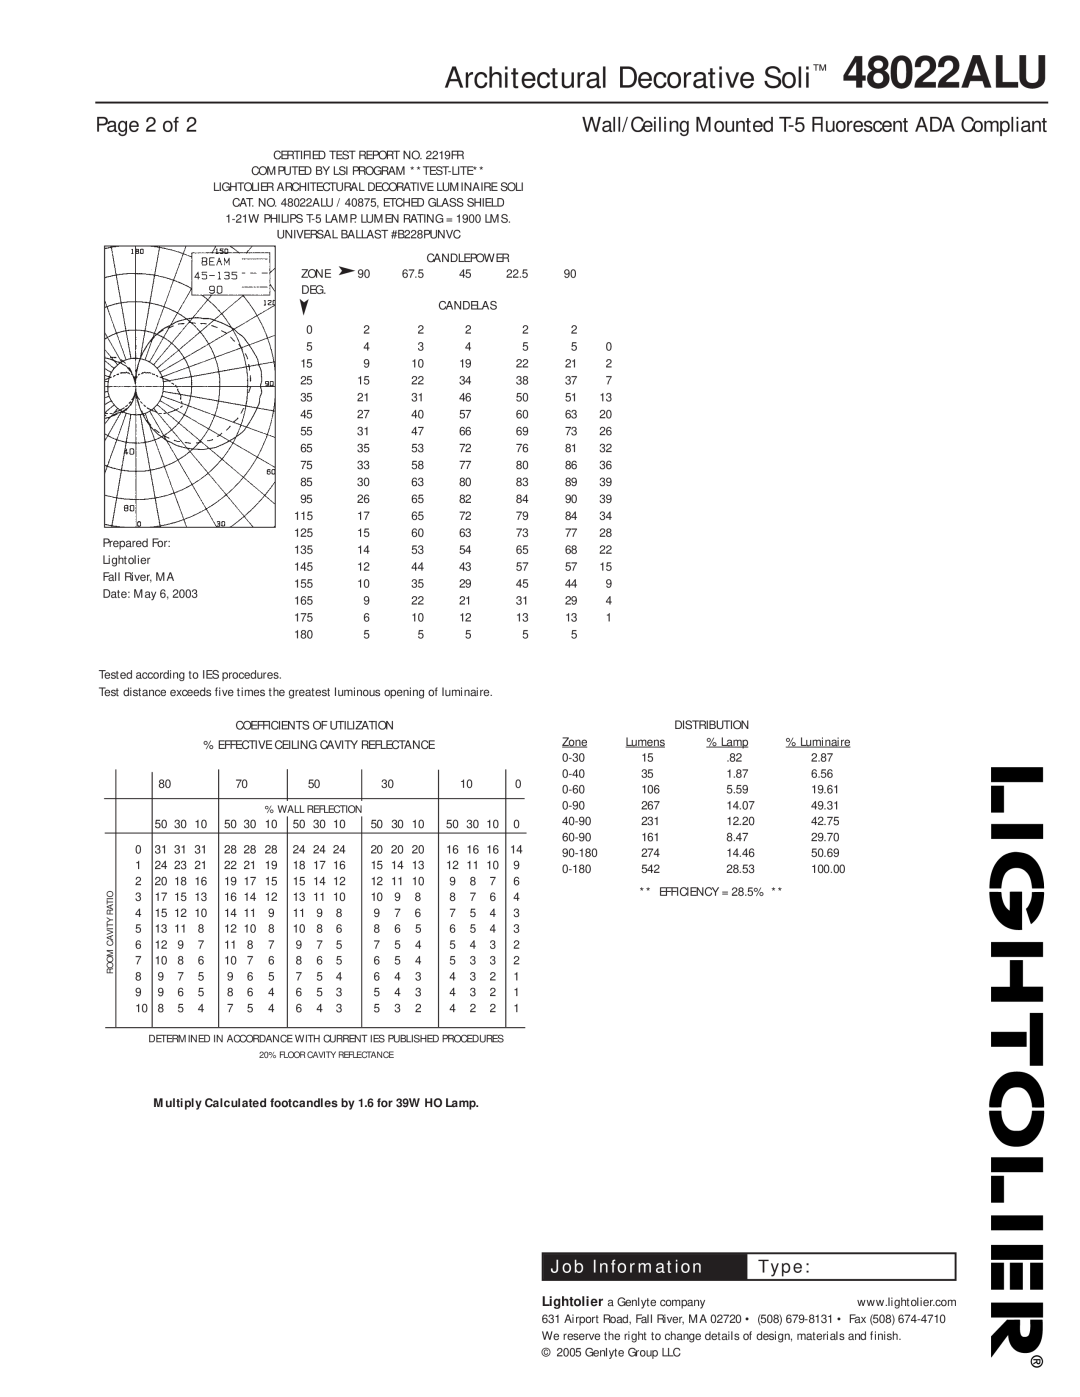 Lightolier Architectural Decorative Soli 48022ALU, Page 2 of, Wall/Ceiling Mounted T-5Fluorescent ADA Compliant, Type 